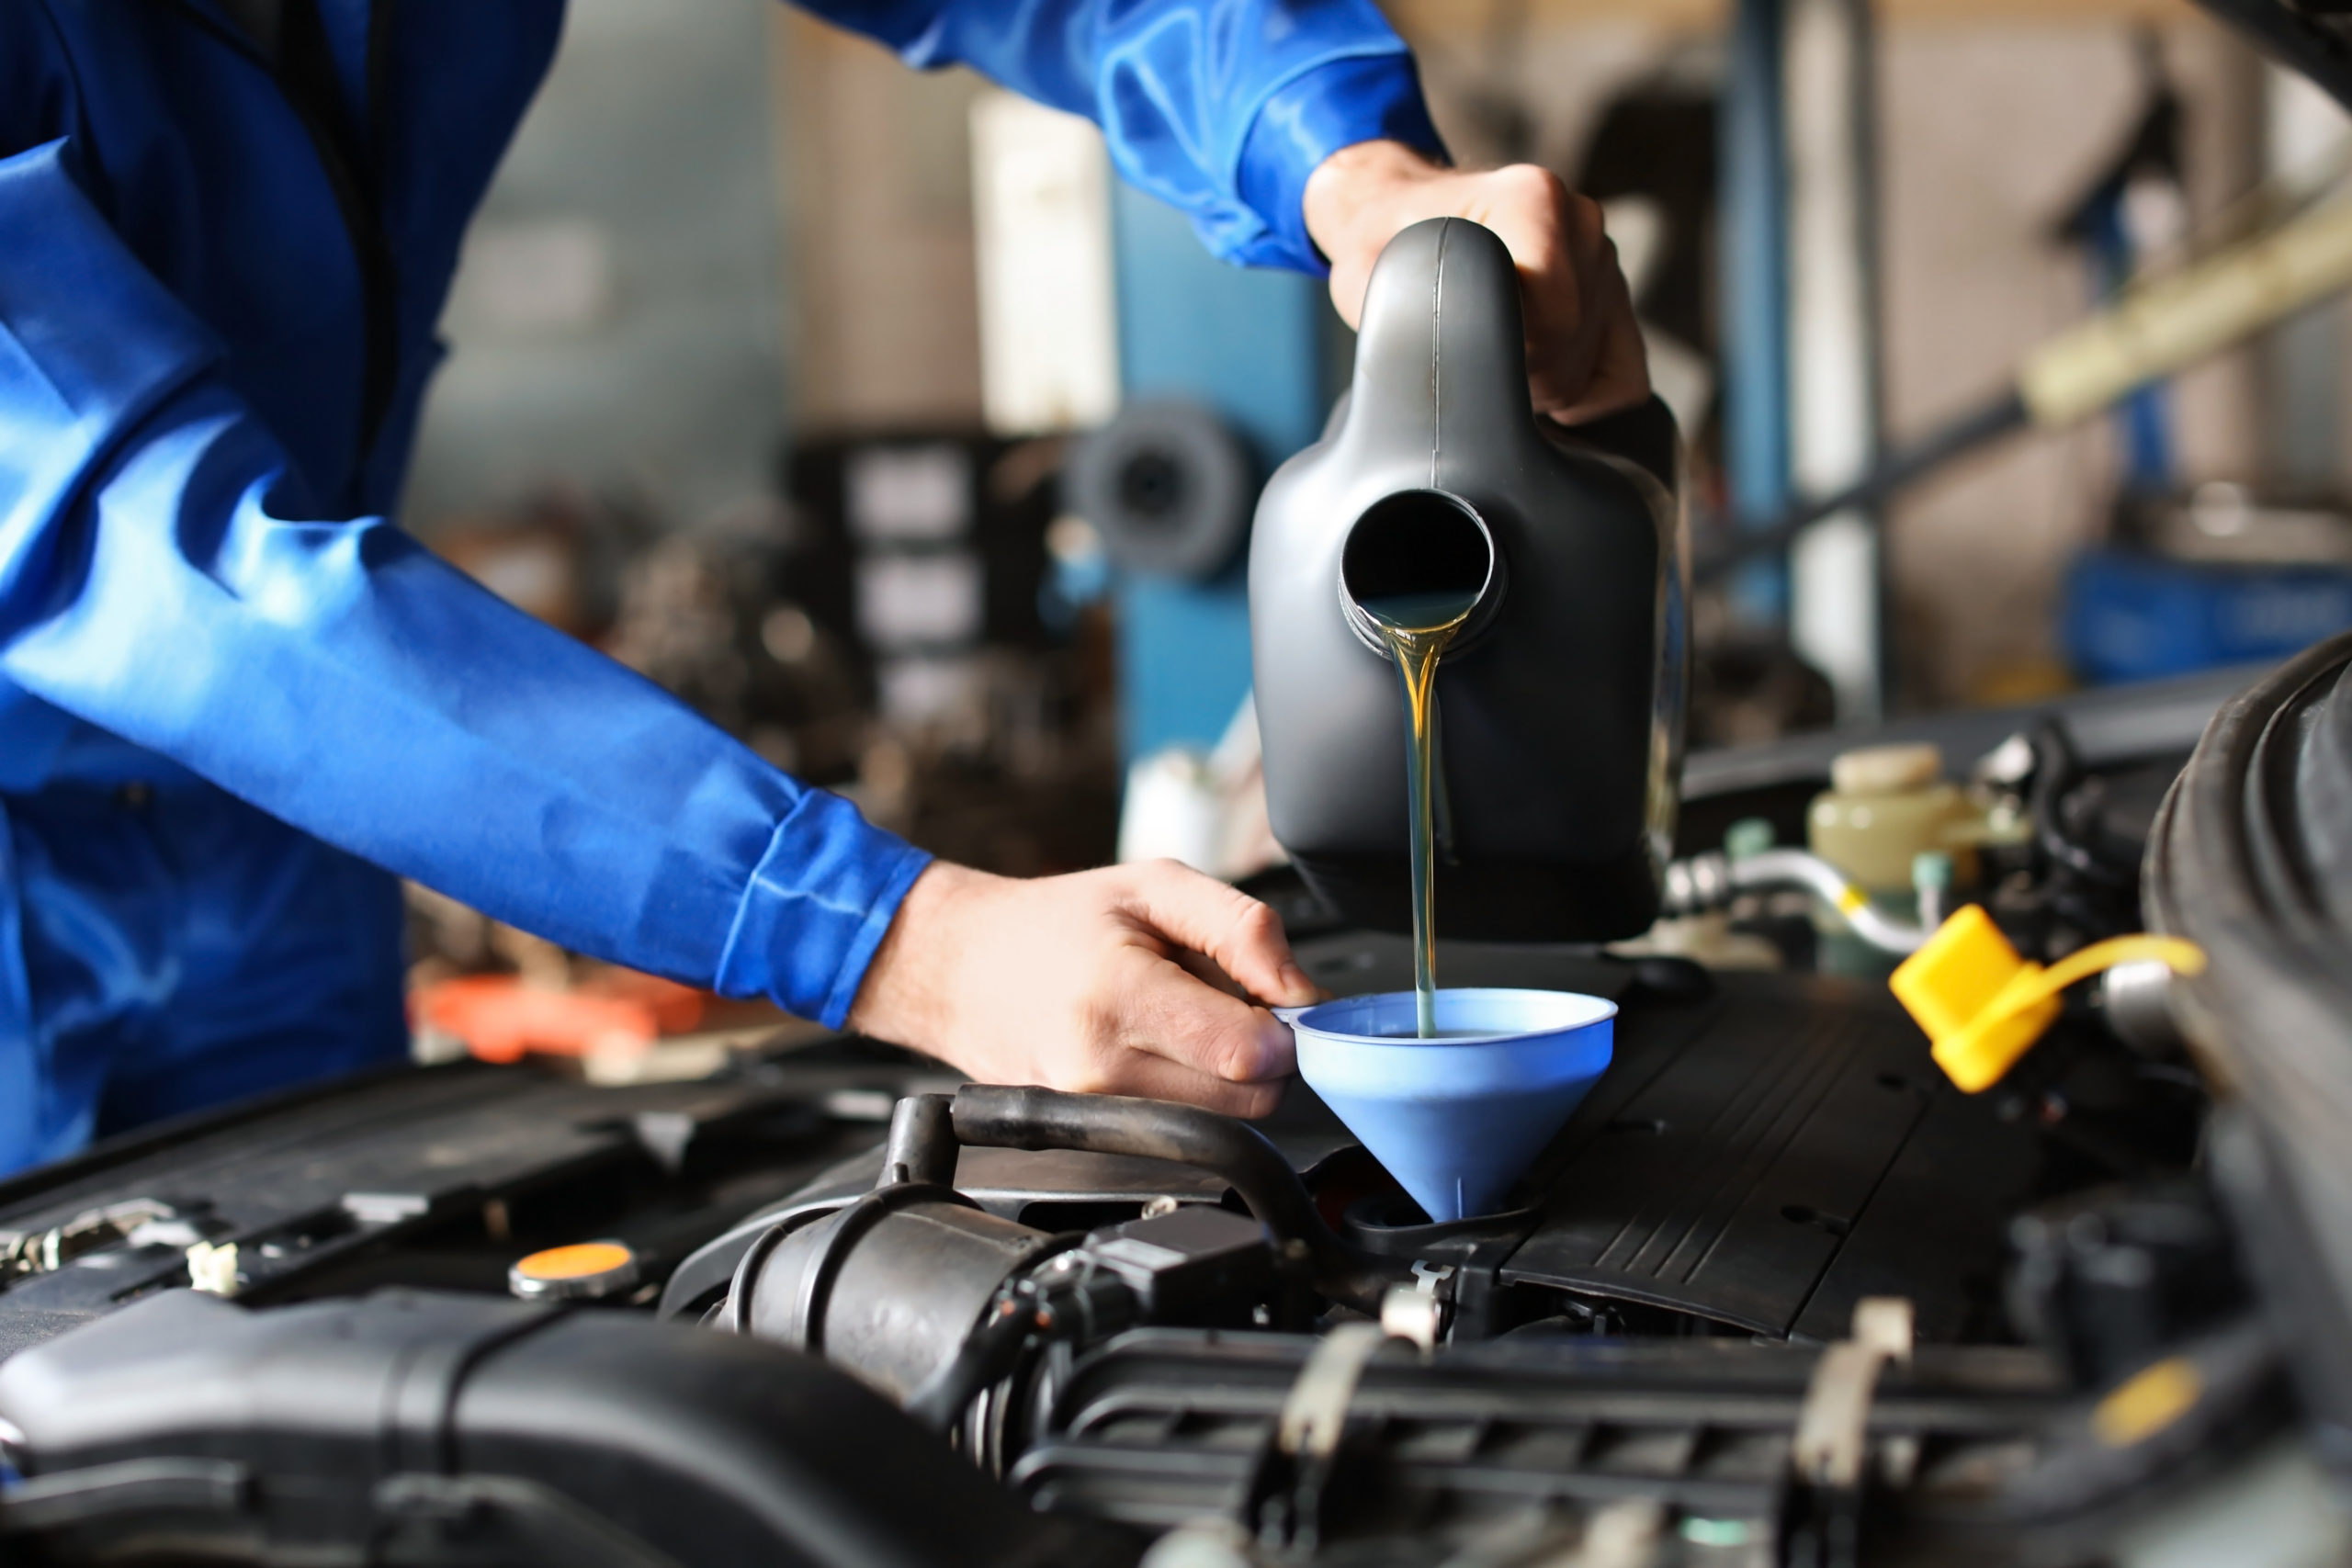 Business Analysis is Like an Oil Change When it Comes to ERP Implementation